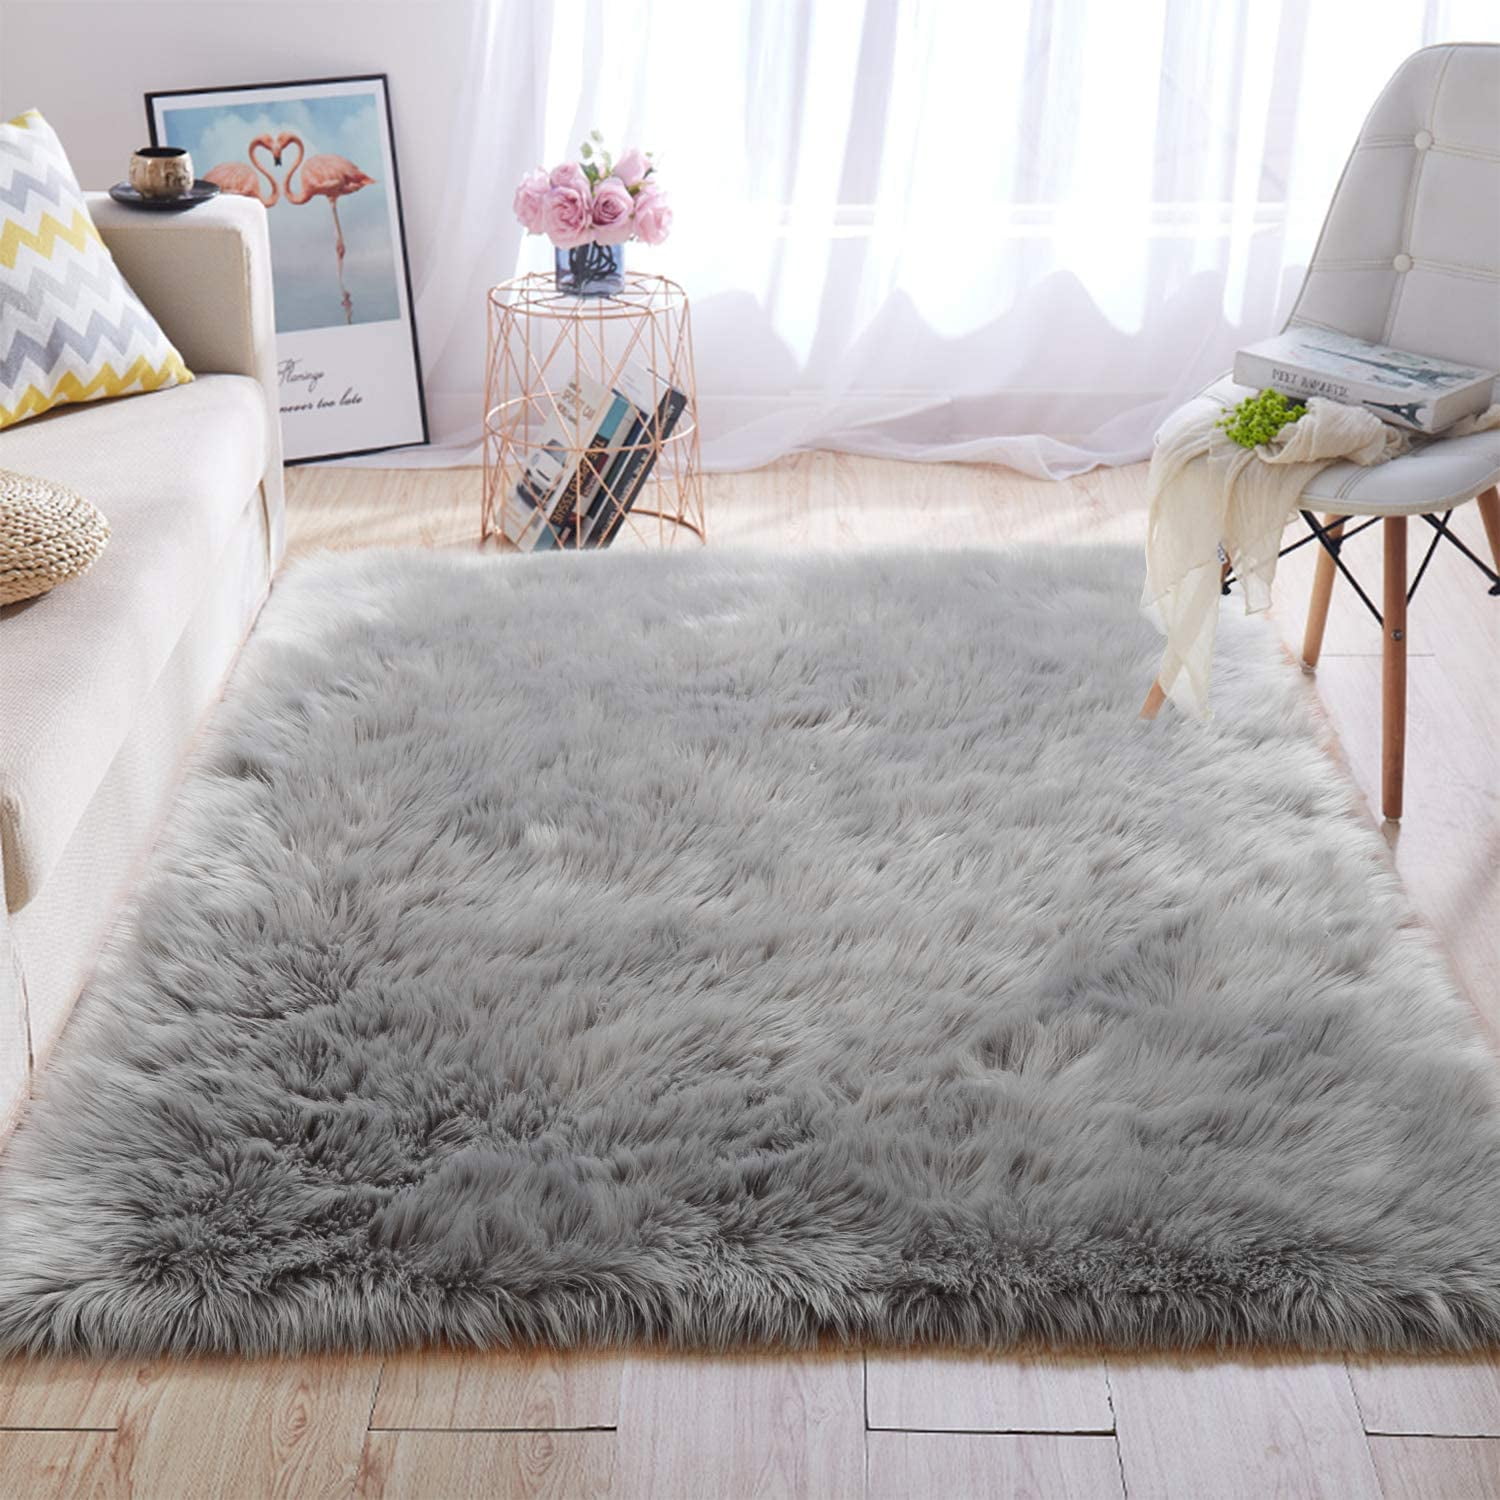 Details about   Fluffy Rugs Soft Solid Faux Fur Hairy Carpet Floor Home Living Room Area Rug Mat 